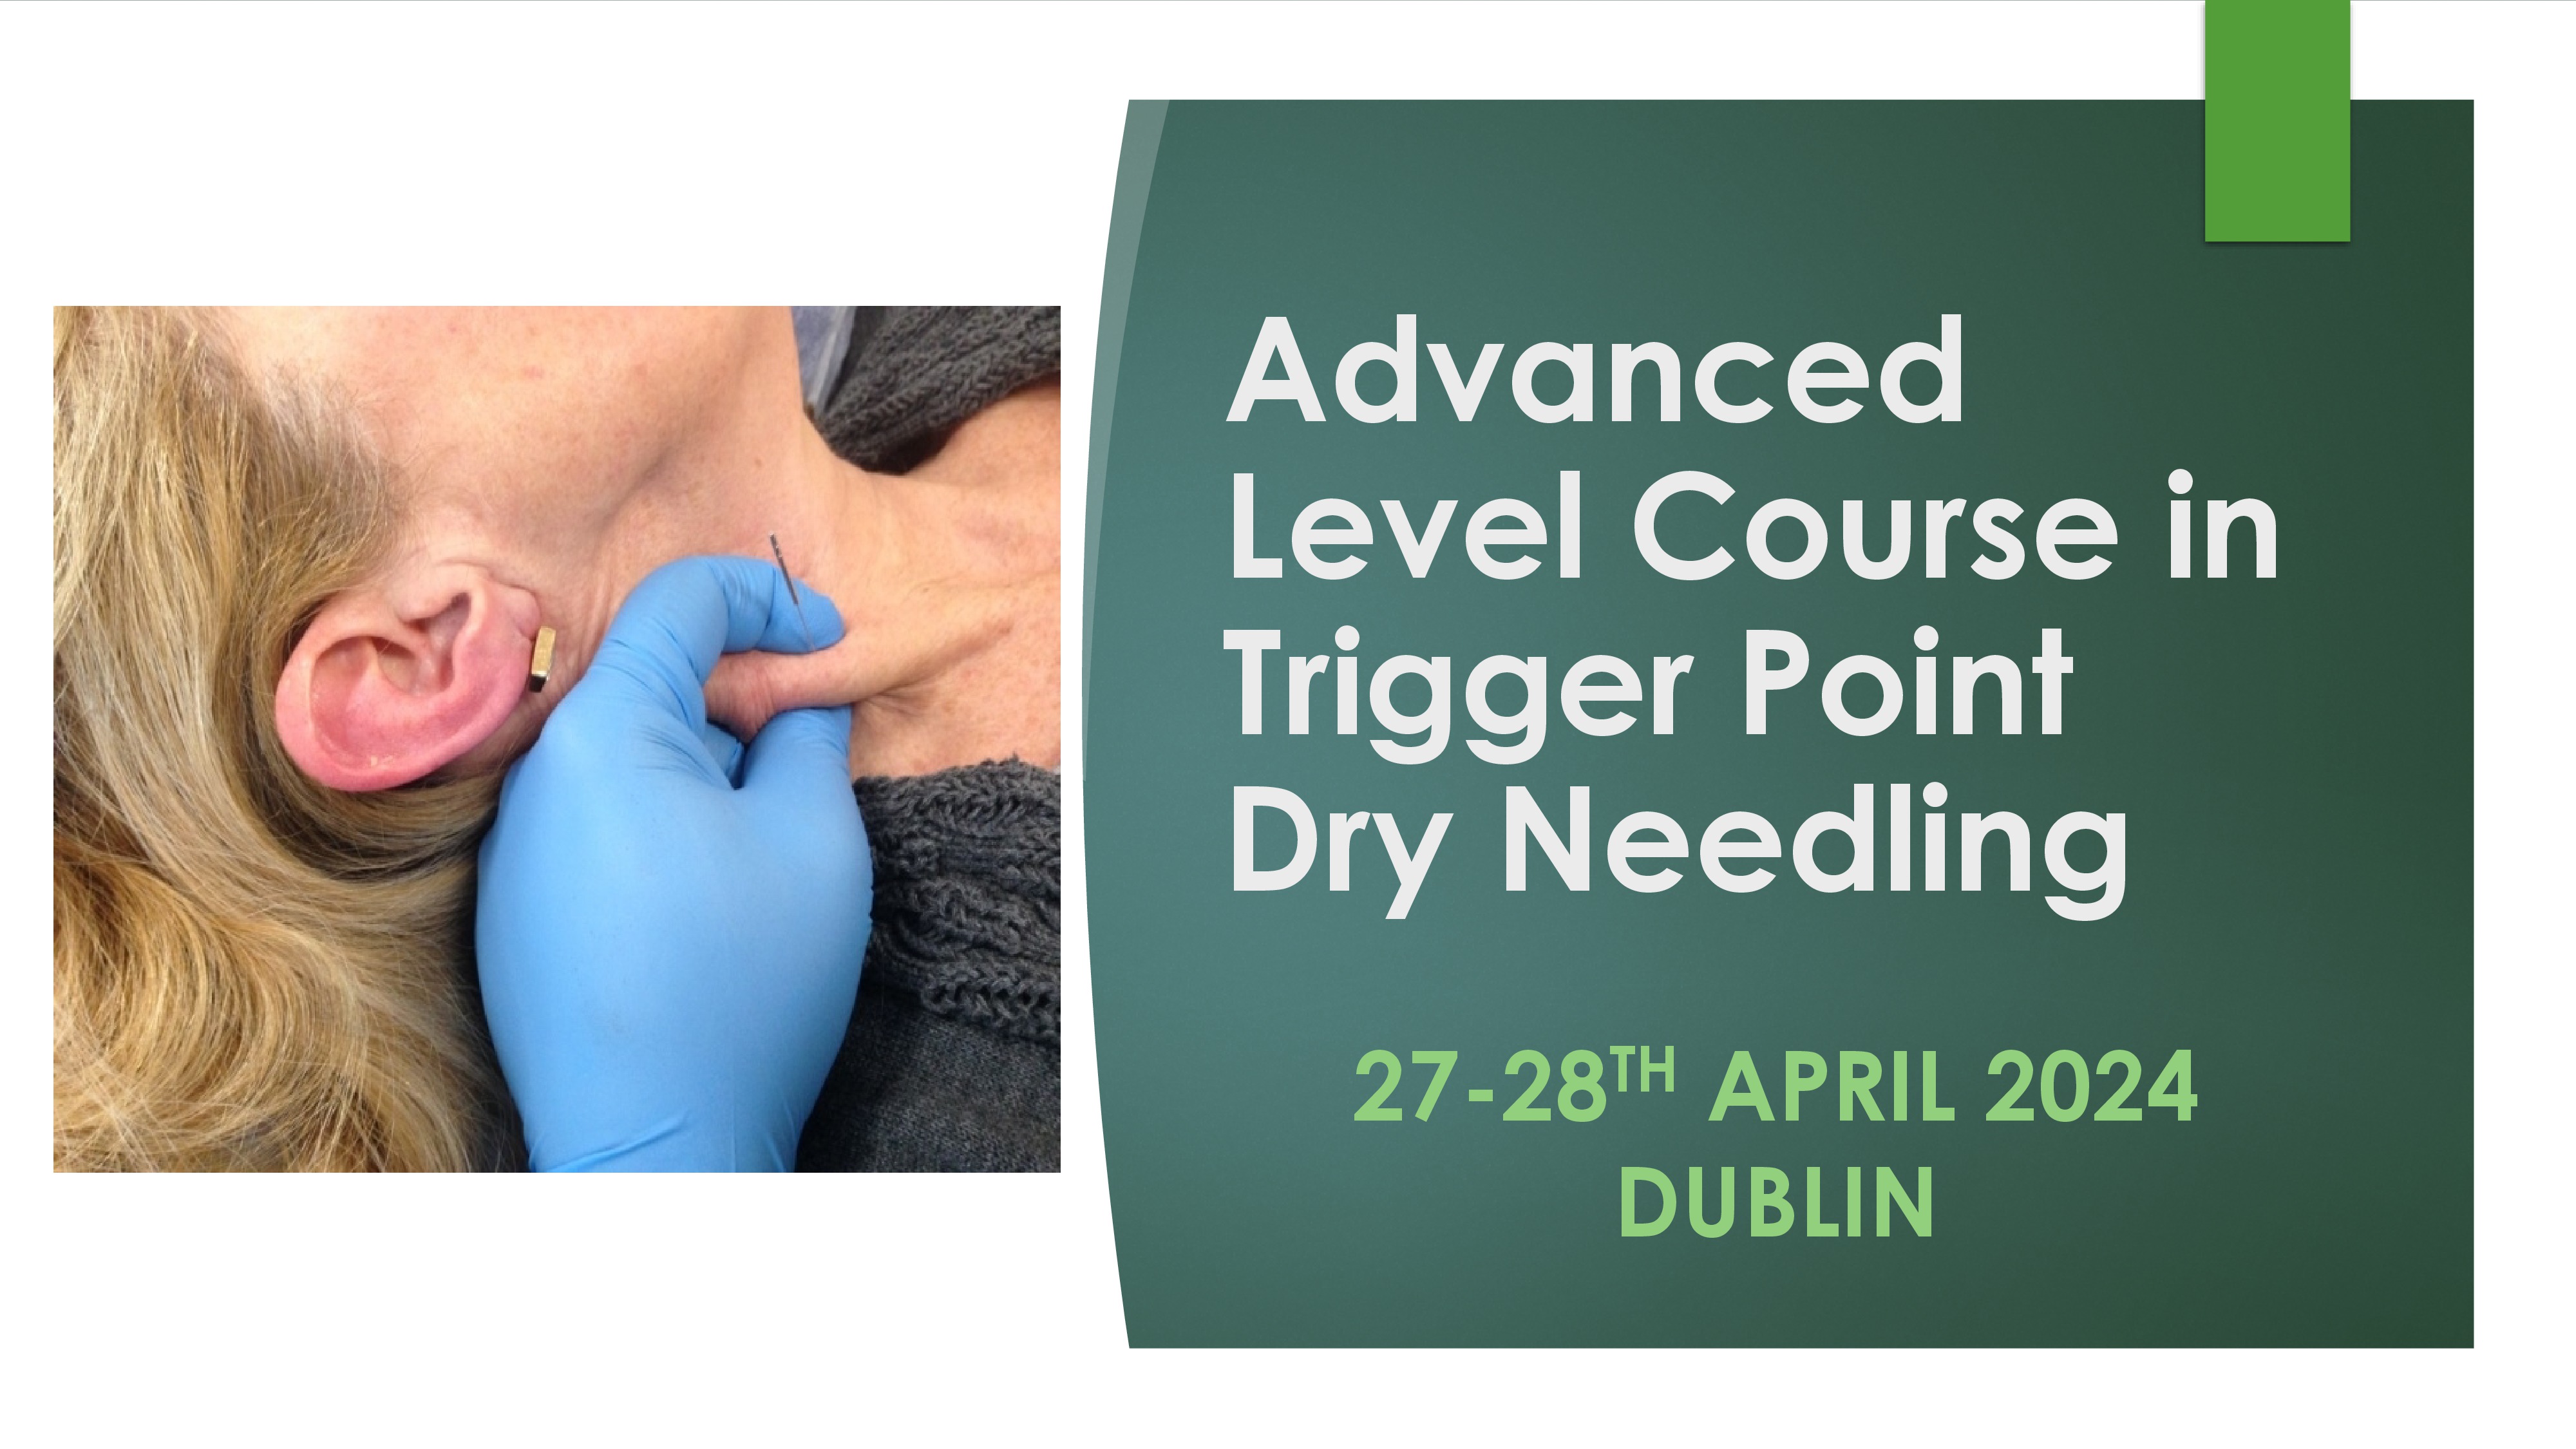 Advanced Level Course in Trigger Point Dry Needling 27-28th April 2024  DUBLIN